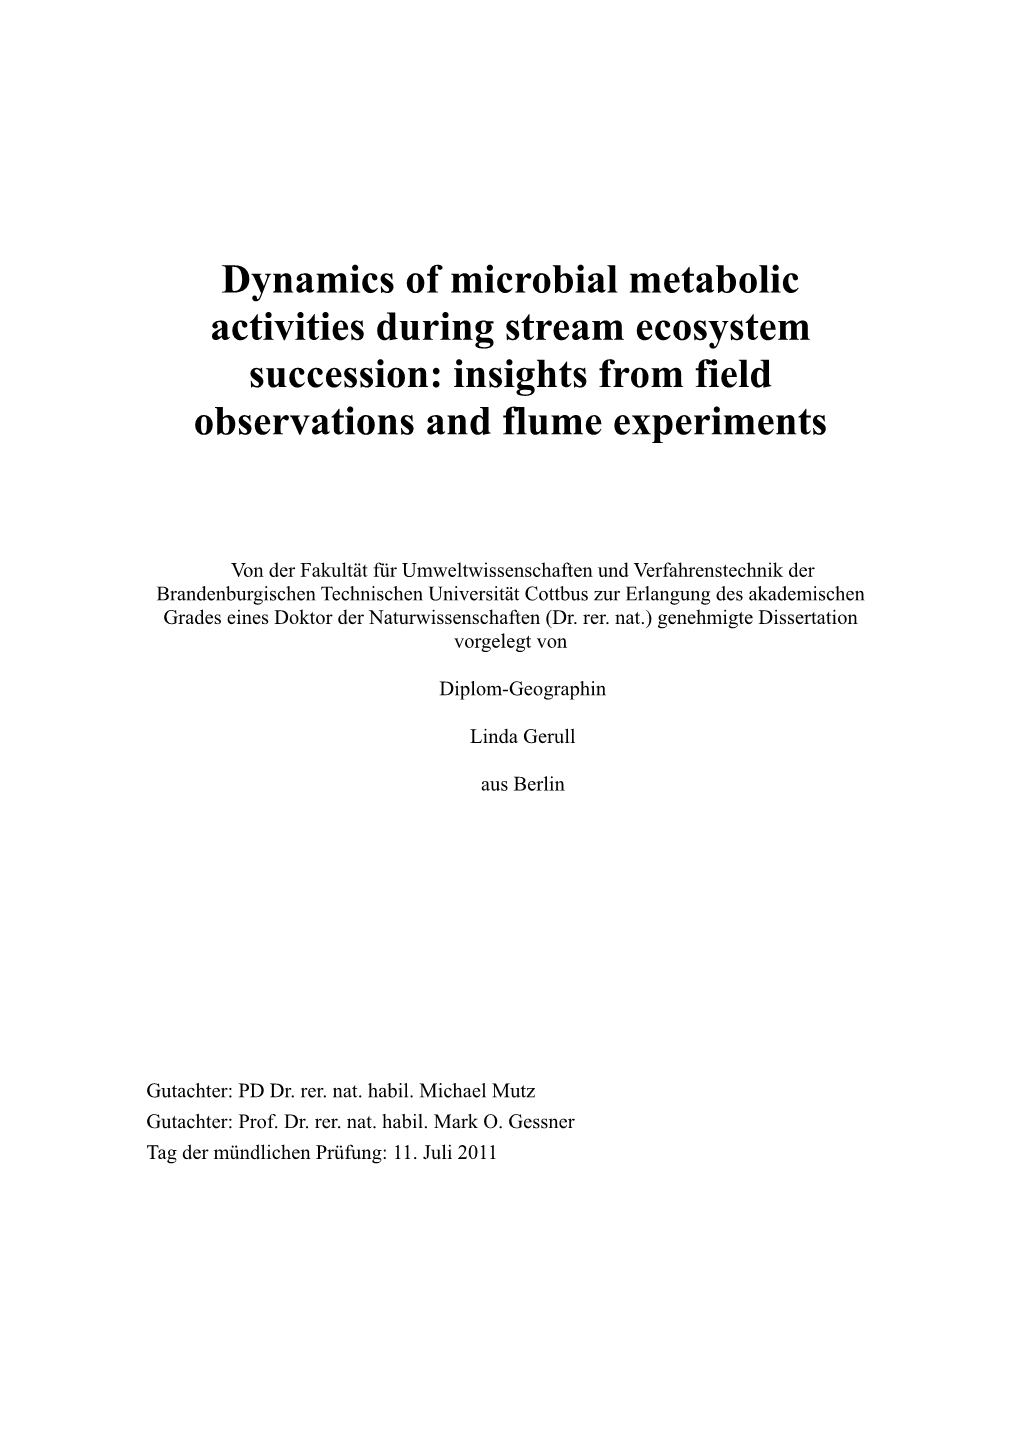 Dynamics of Microbial Metabolic Activities During Stream Ecosystem Succession: Insights from Field Observations and Flume Experiments